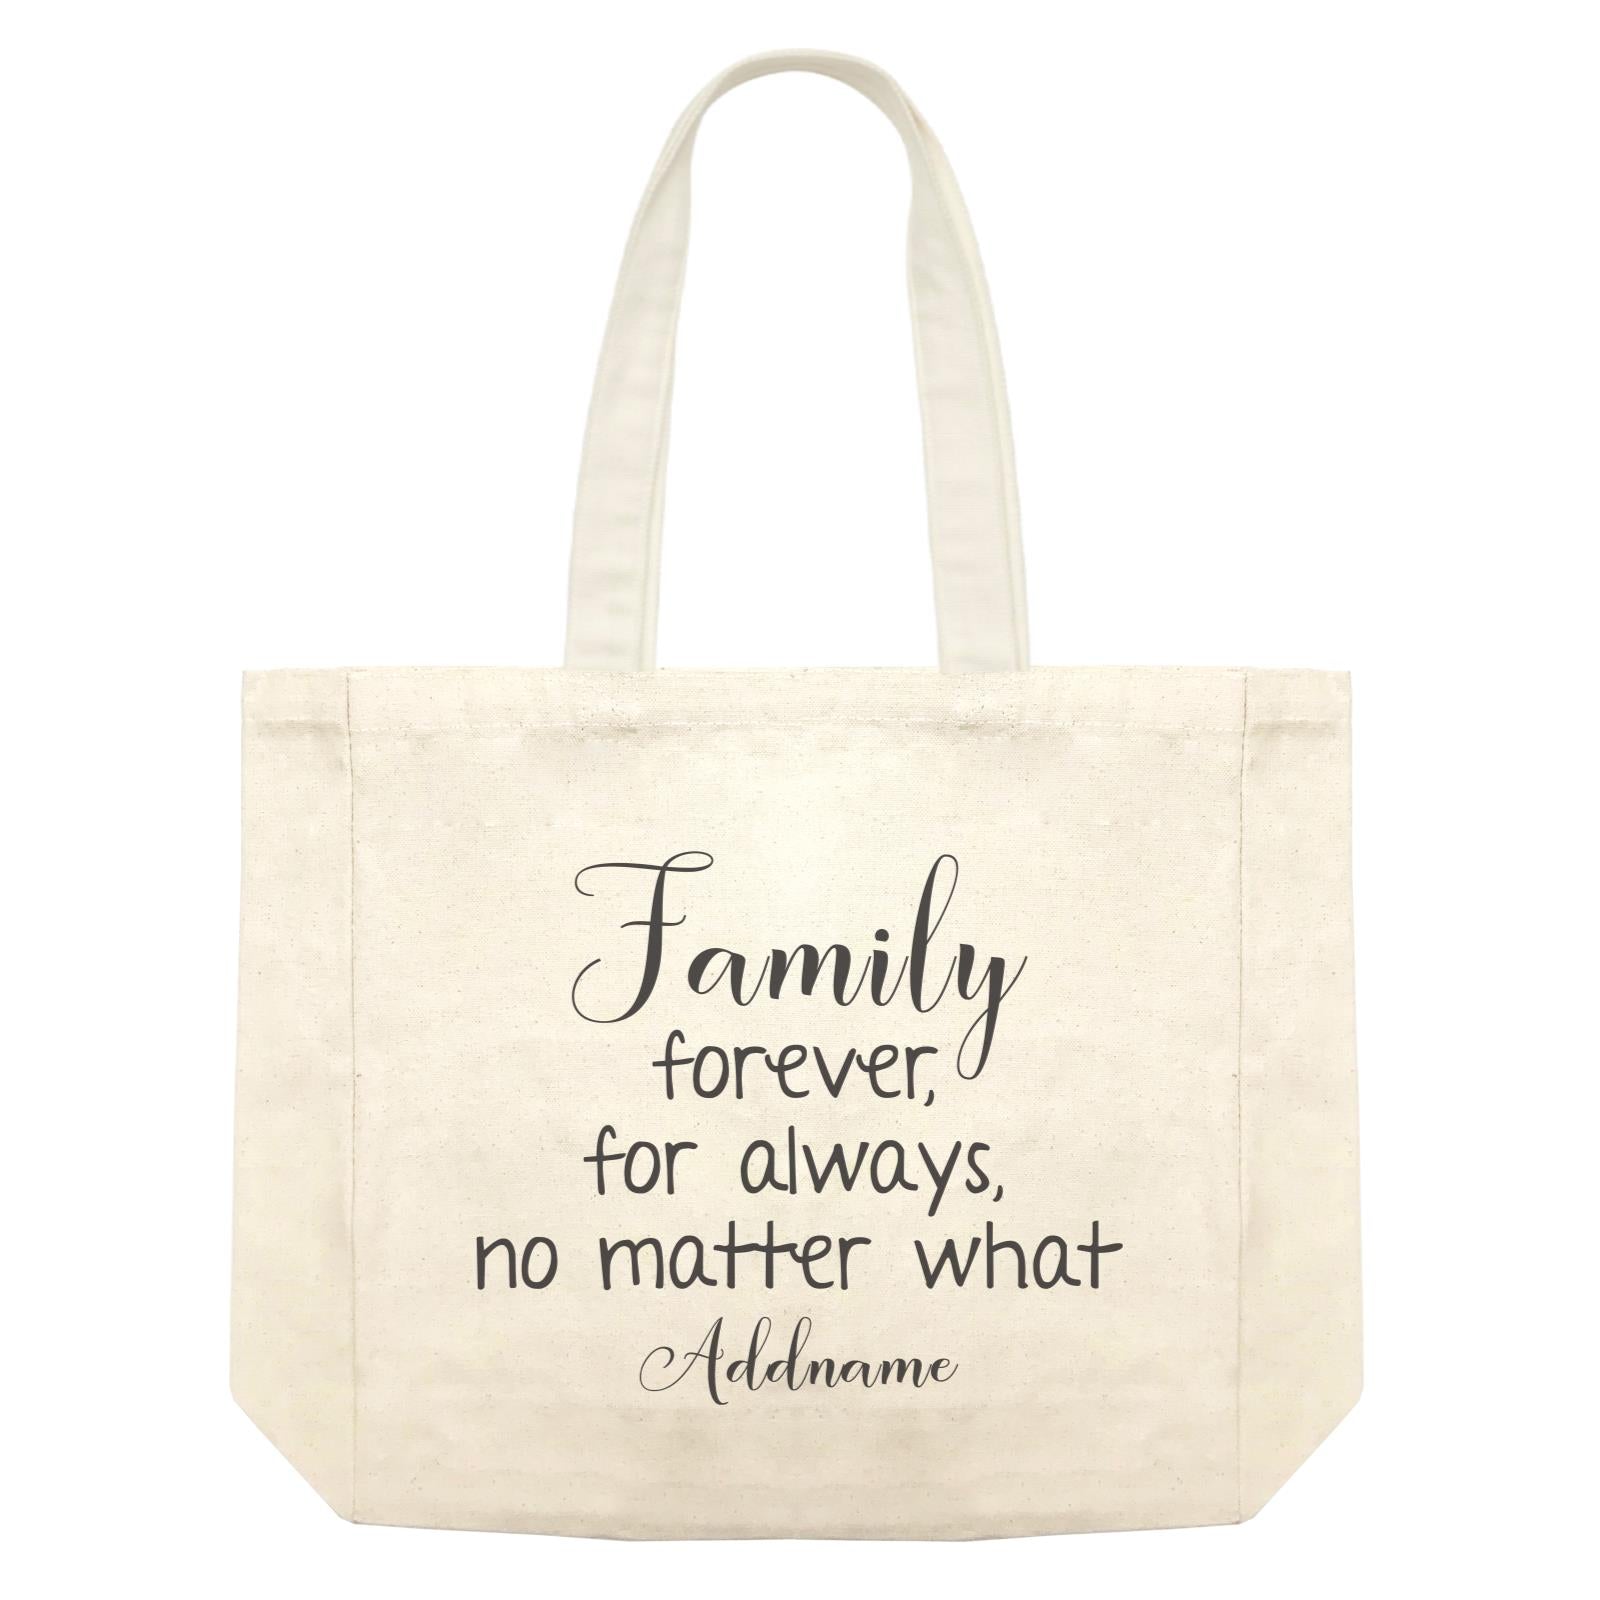 Family Is Everythings Quotes Family Forever For Always No Matter What Addname Shopping Bag